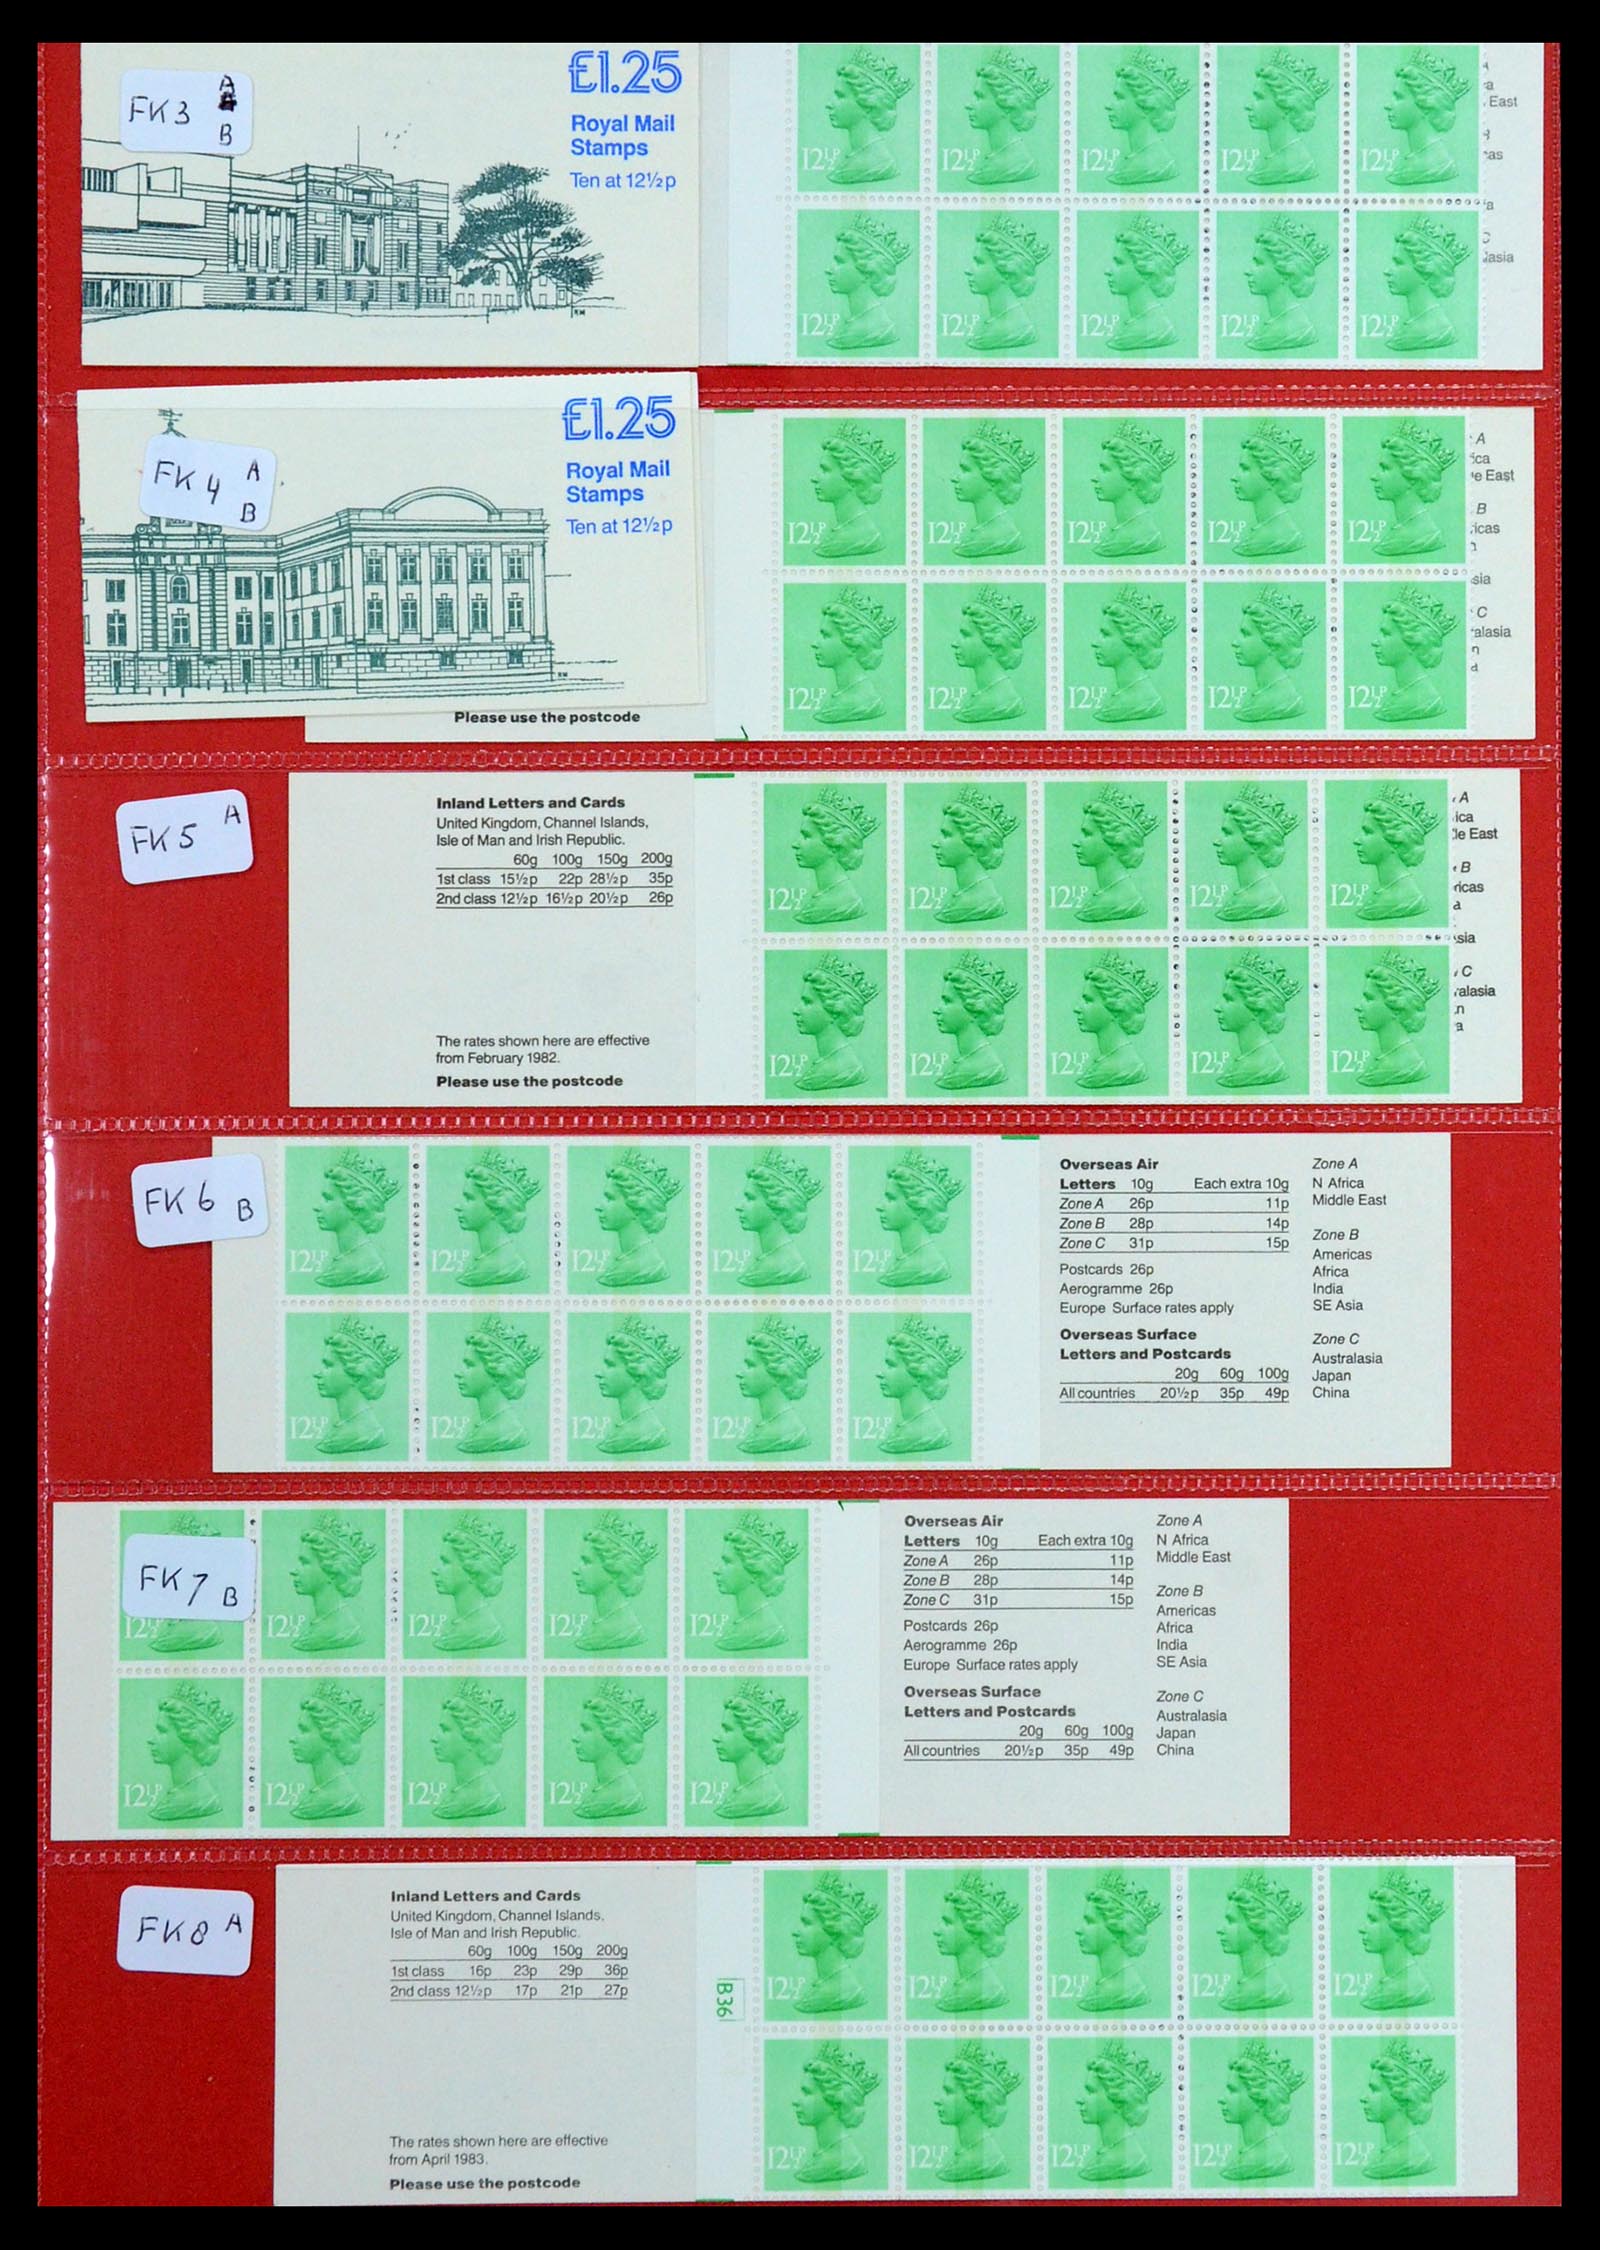 36368 019 - Stamp collection 36368 Great Britain stamp booklets 1976-2000.